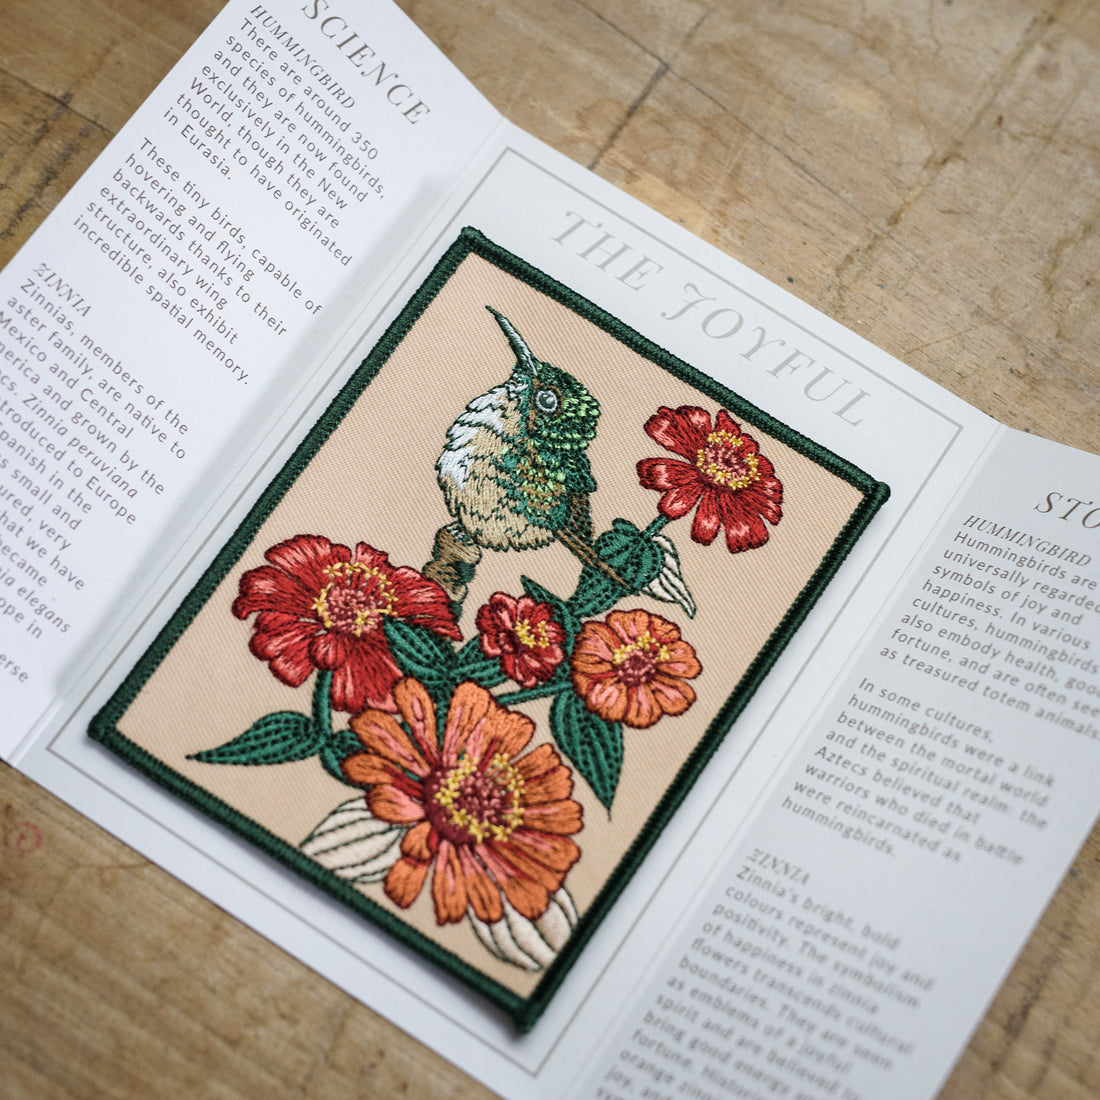 Hummingbird and Zinnia Embroidered Patch in gatefold card with science and story behind the species